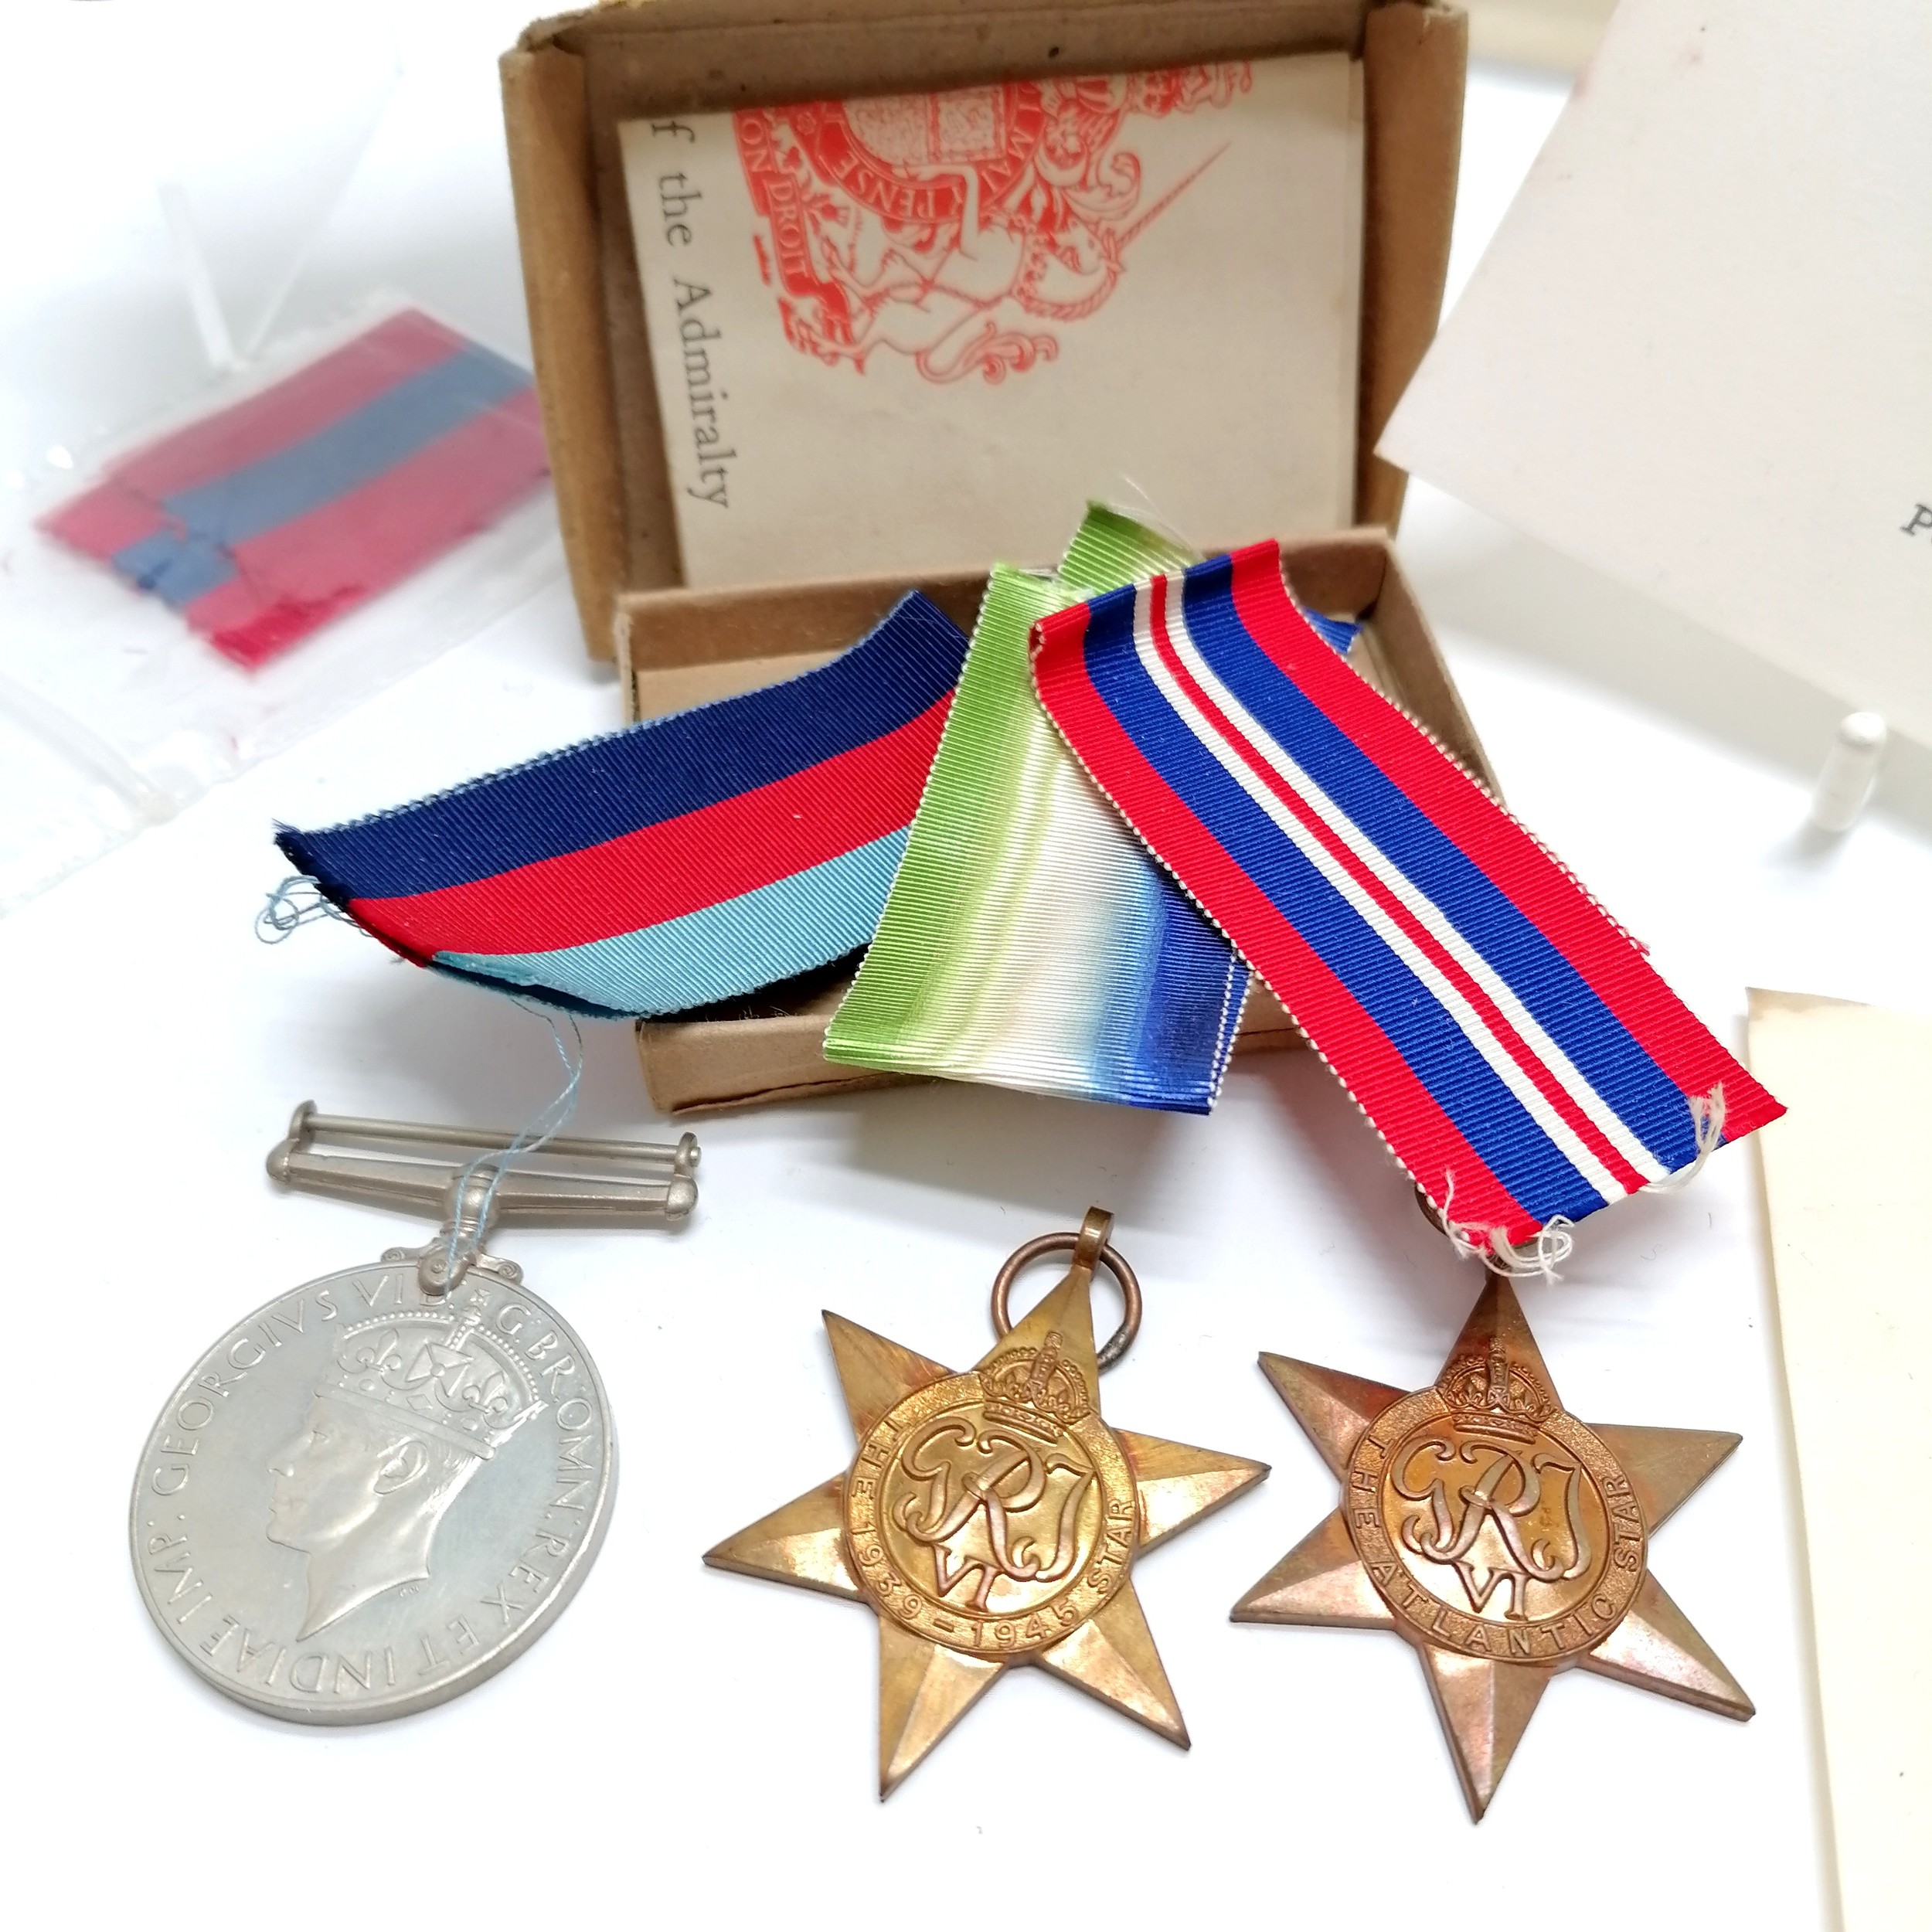 WWI group of medals for Charles Percy Josling (b.1891) - 1914-15 star, British War medal, Victory - Image 9 of 10